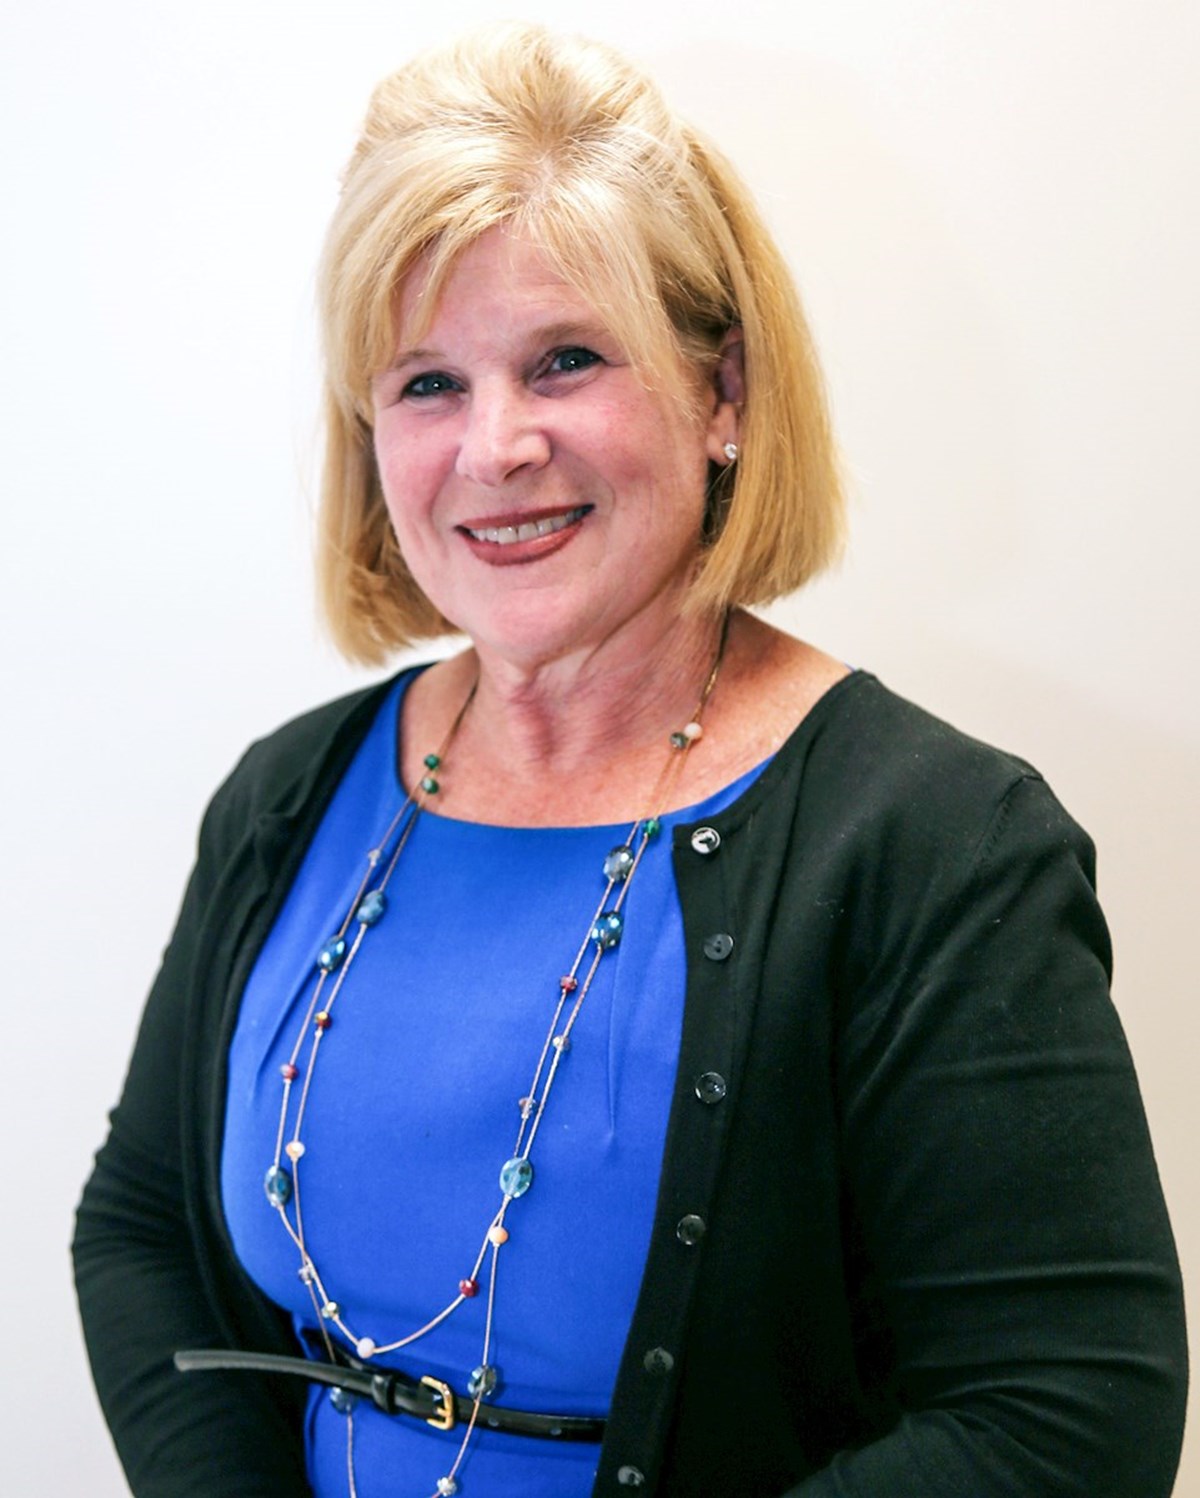 Mary Phillips recognized as Leader in Supply Chain